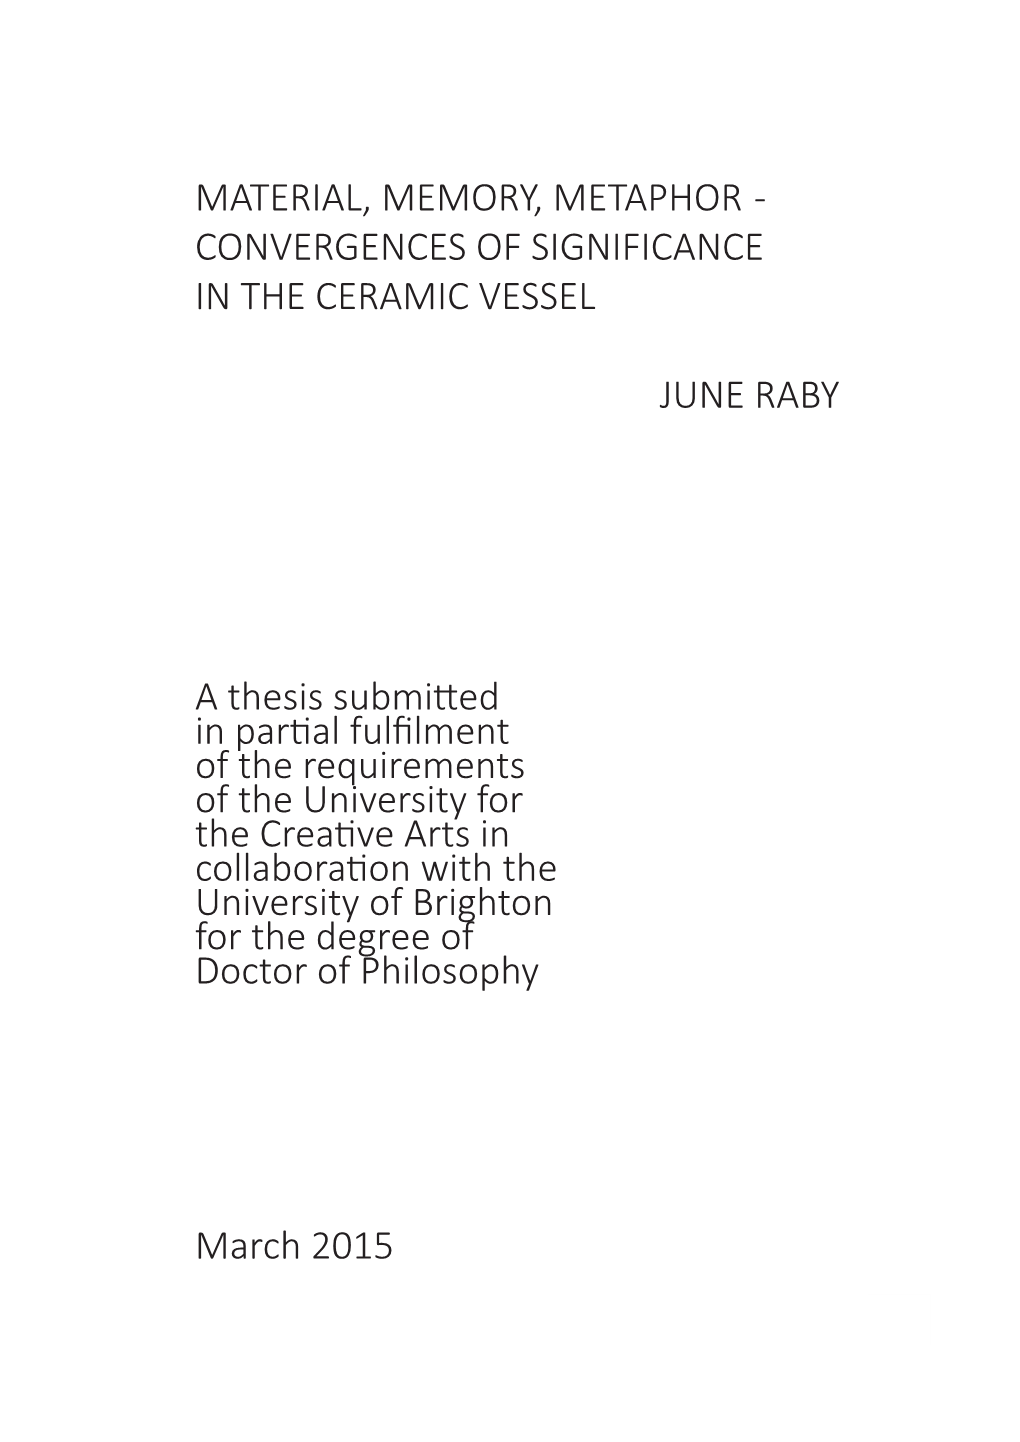 Phd Thesis, Royal College of Art Douglas, Mary (2003) Purity and Danger, an Analysis of Concepts of Pollution and Taboo, Routledge Kegan Paul, UK Dudley, Sarah H